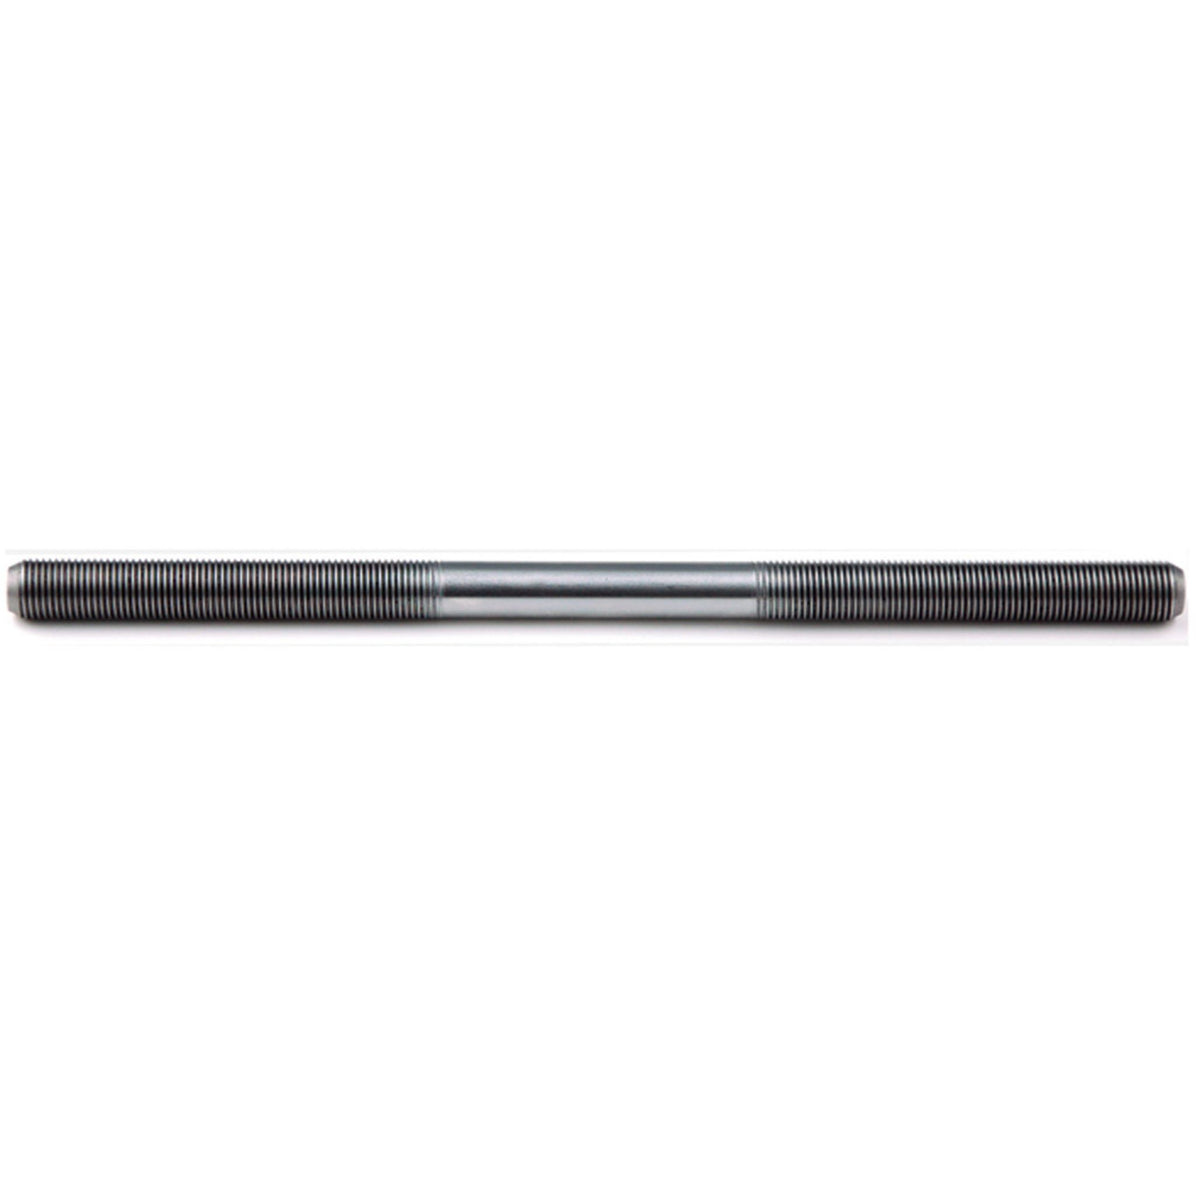 Wheels Manufacturing 10mm x 26 tpi - 141mm length - Q/R hollow axle